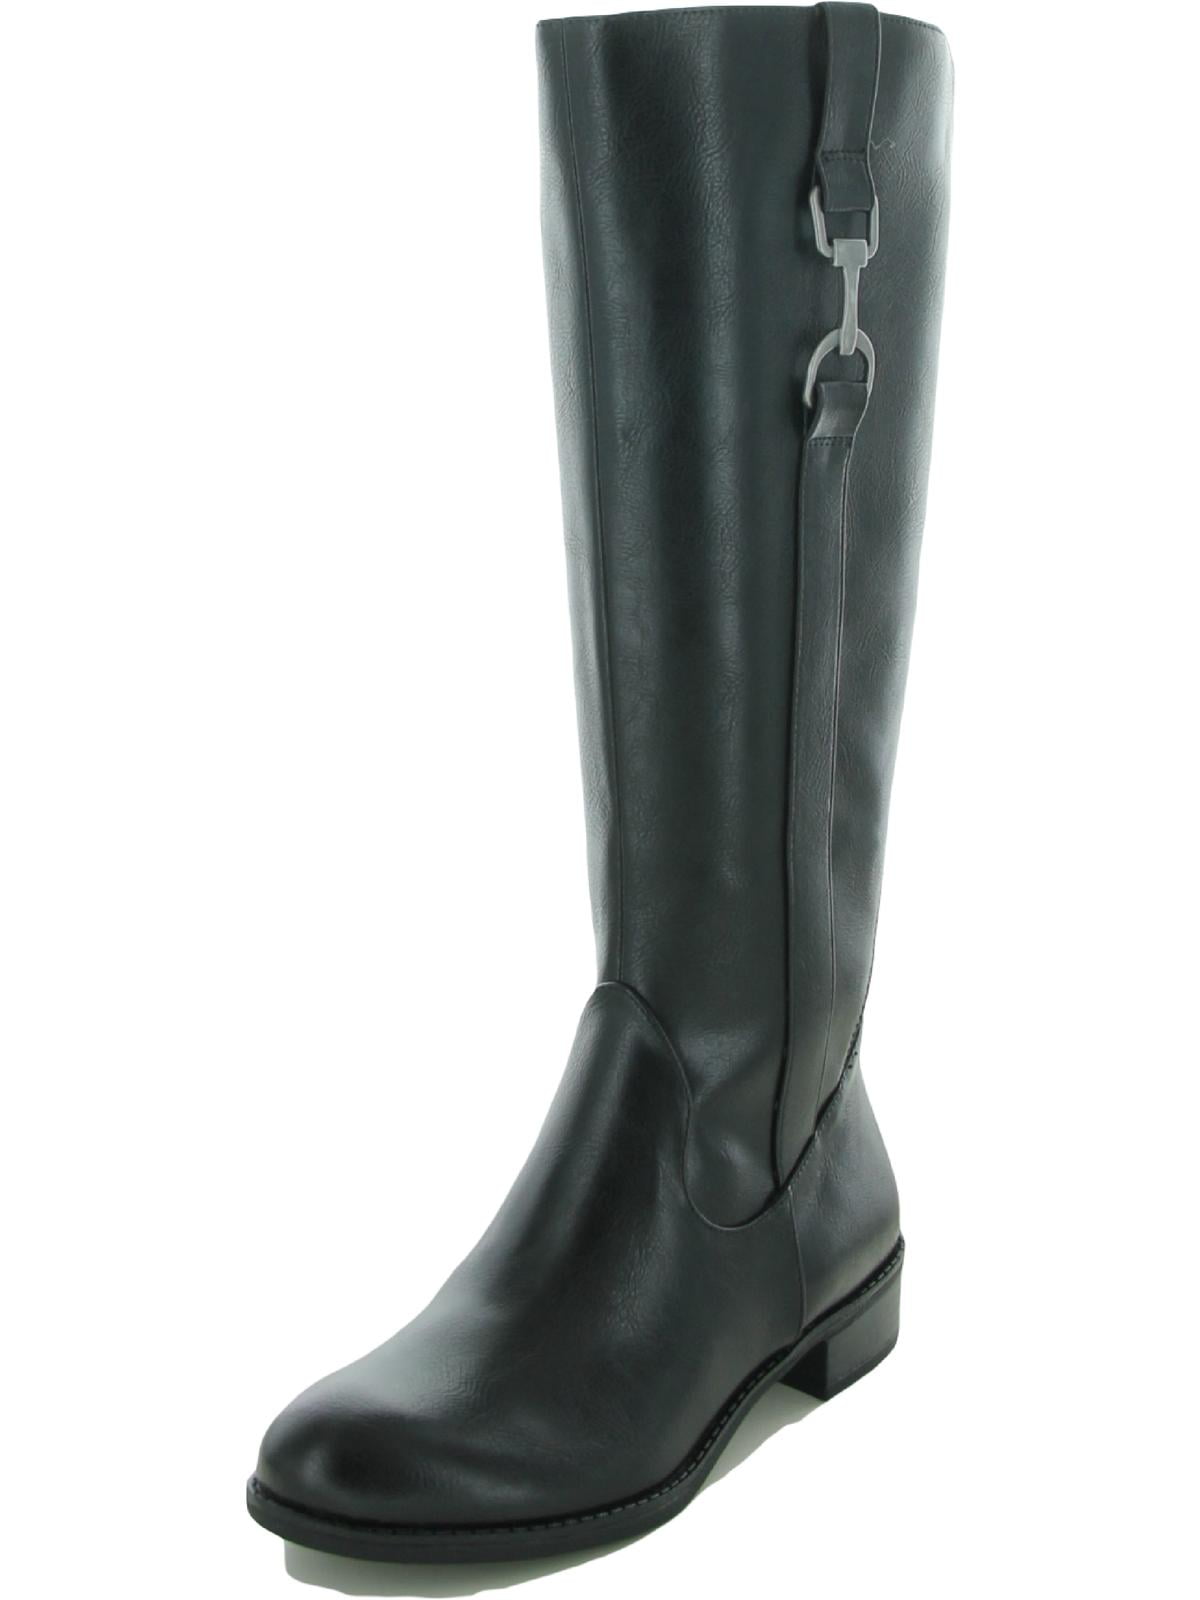 Horze Supreme Camden Soft Leather Tall Riding Boots with Back Zip and Elastic 